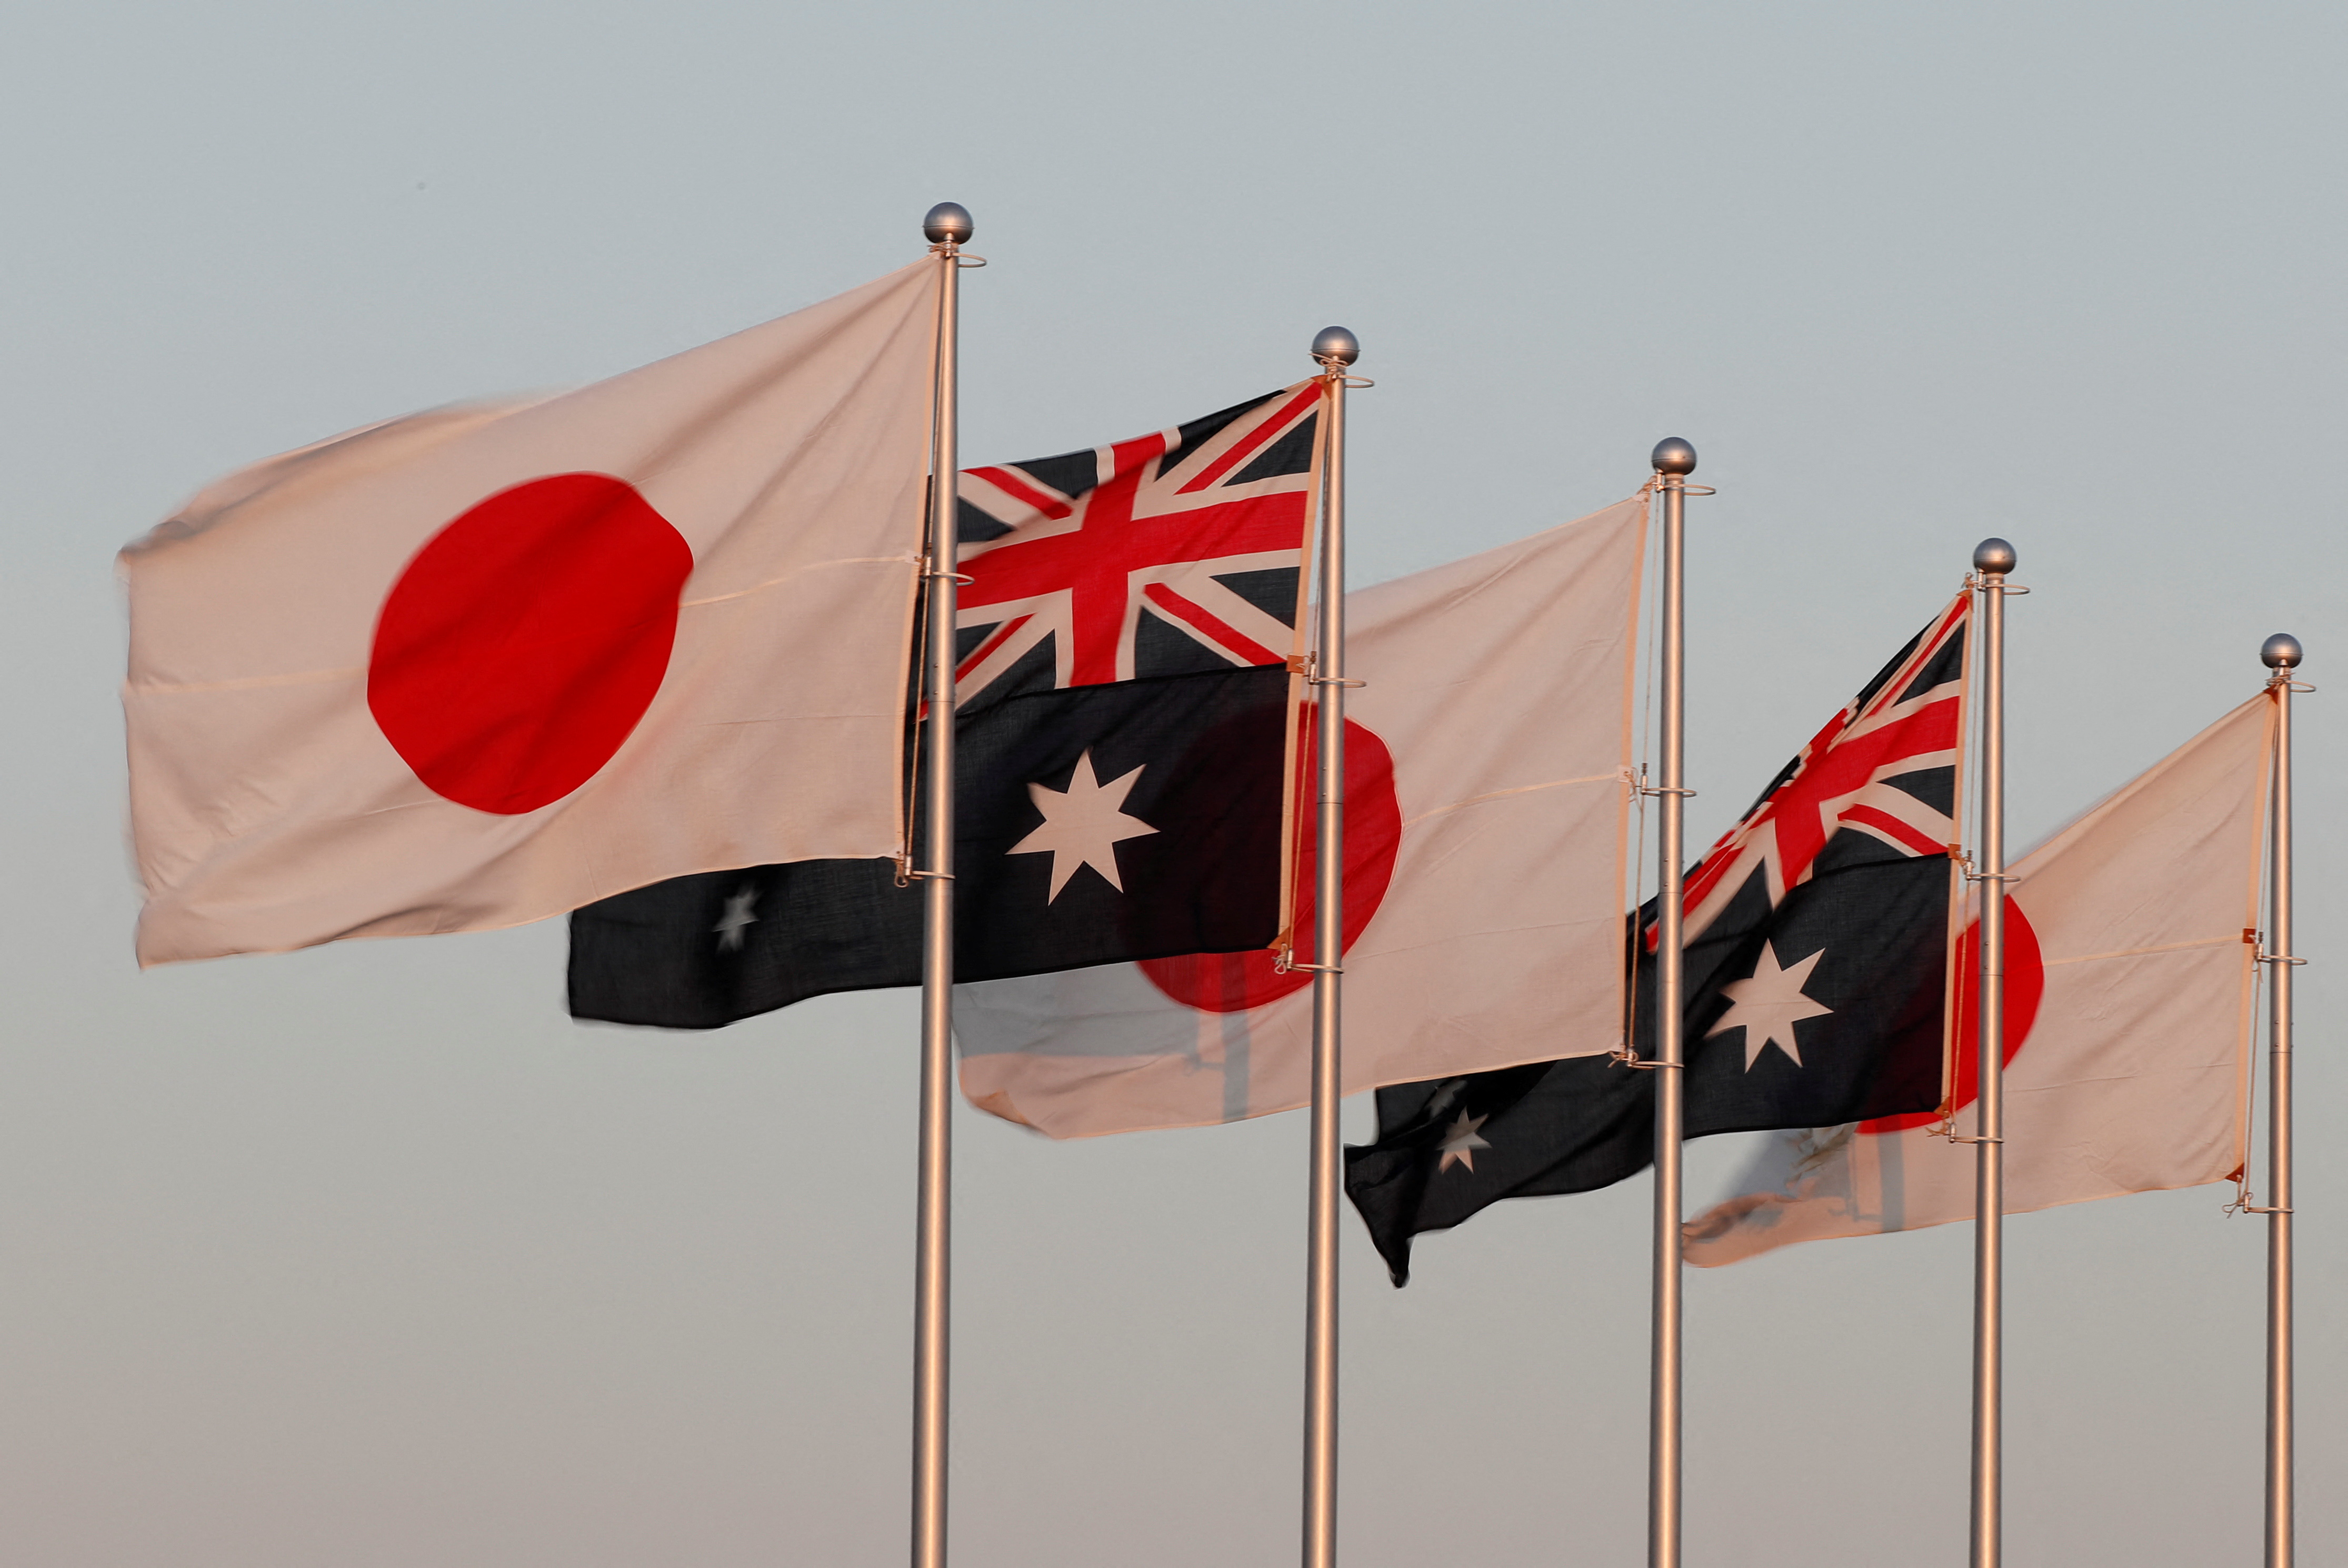 Japanese and Australian flags are pictured before the arrival of Australian Prime Minister Scott Morrison at Haneda airport in Tokyo, Japan November 17, 2020.  REUTERS/Issei Kato